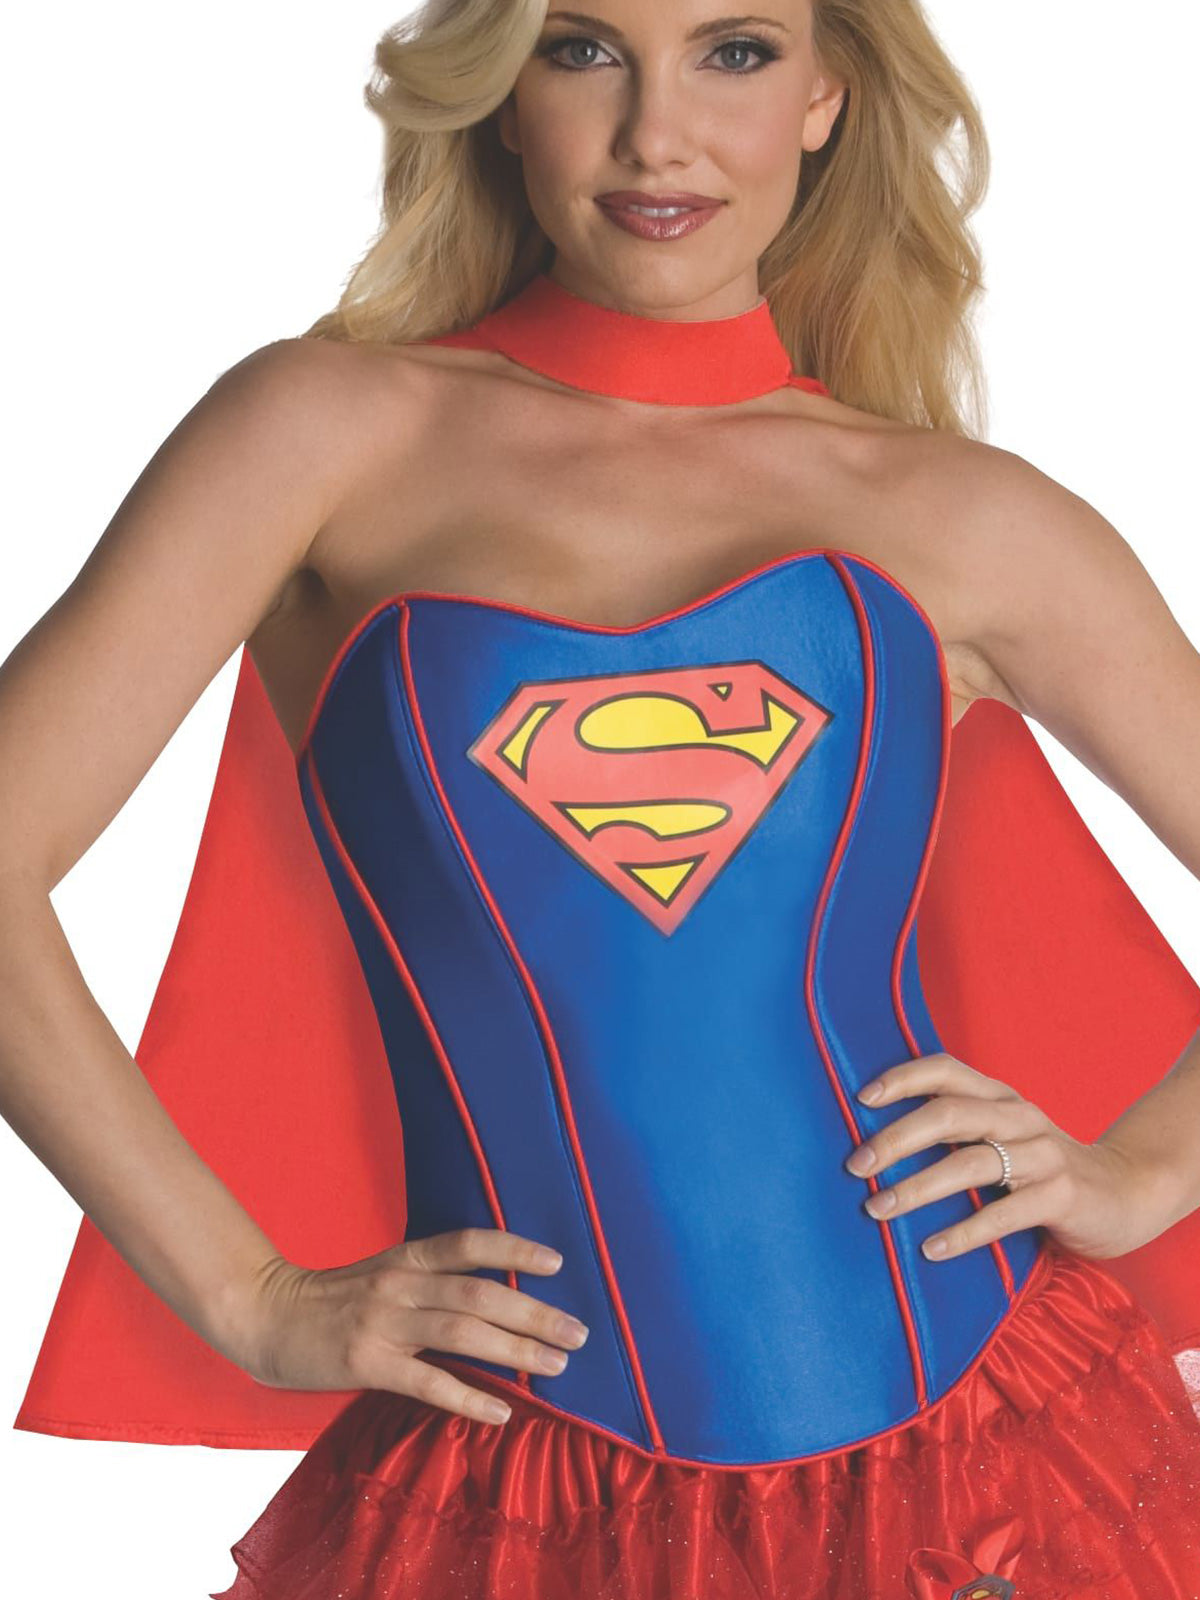 The Complete Supergirl Costume History From the '50s to THE FLASH